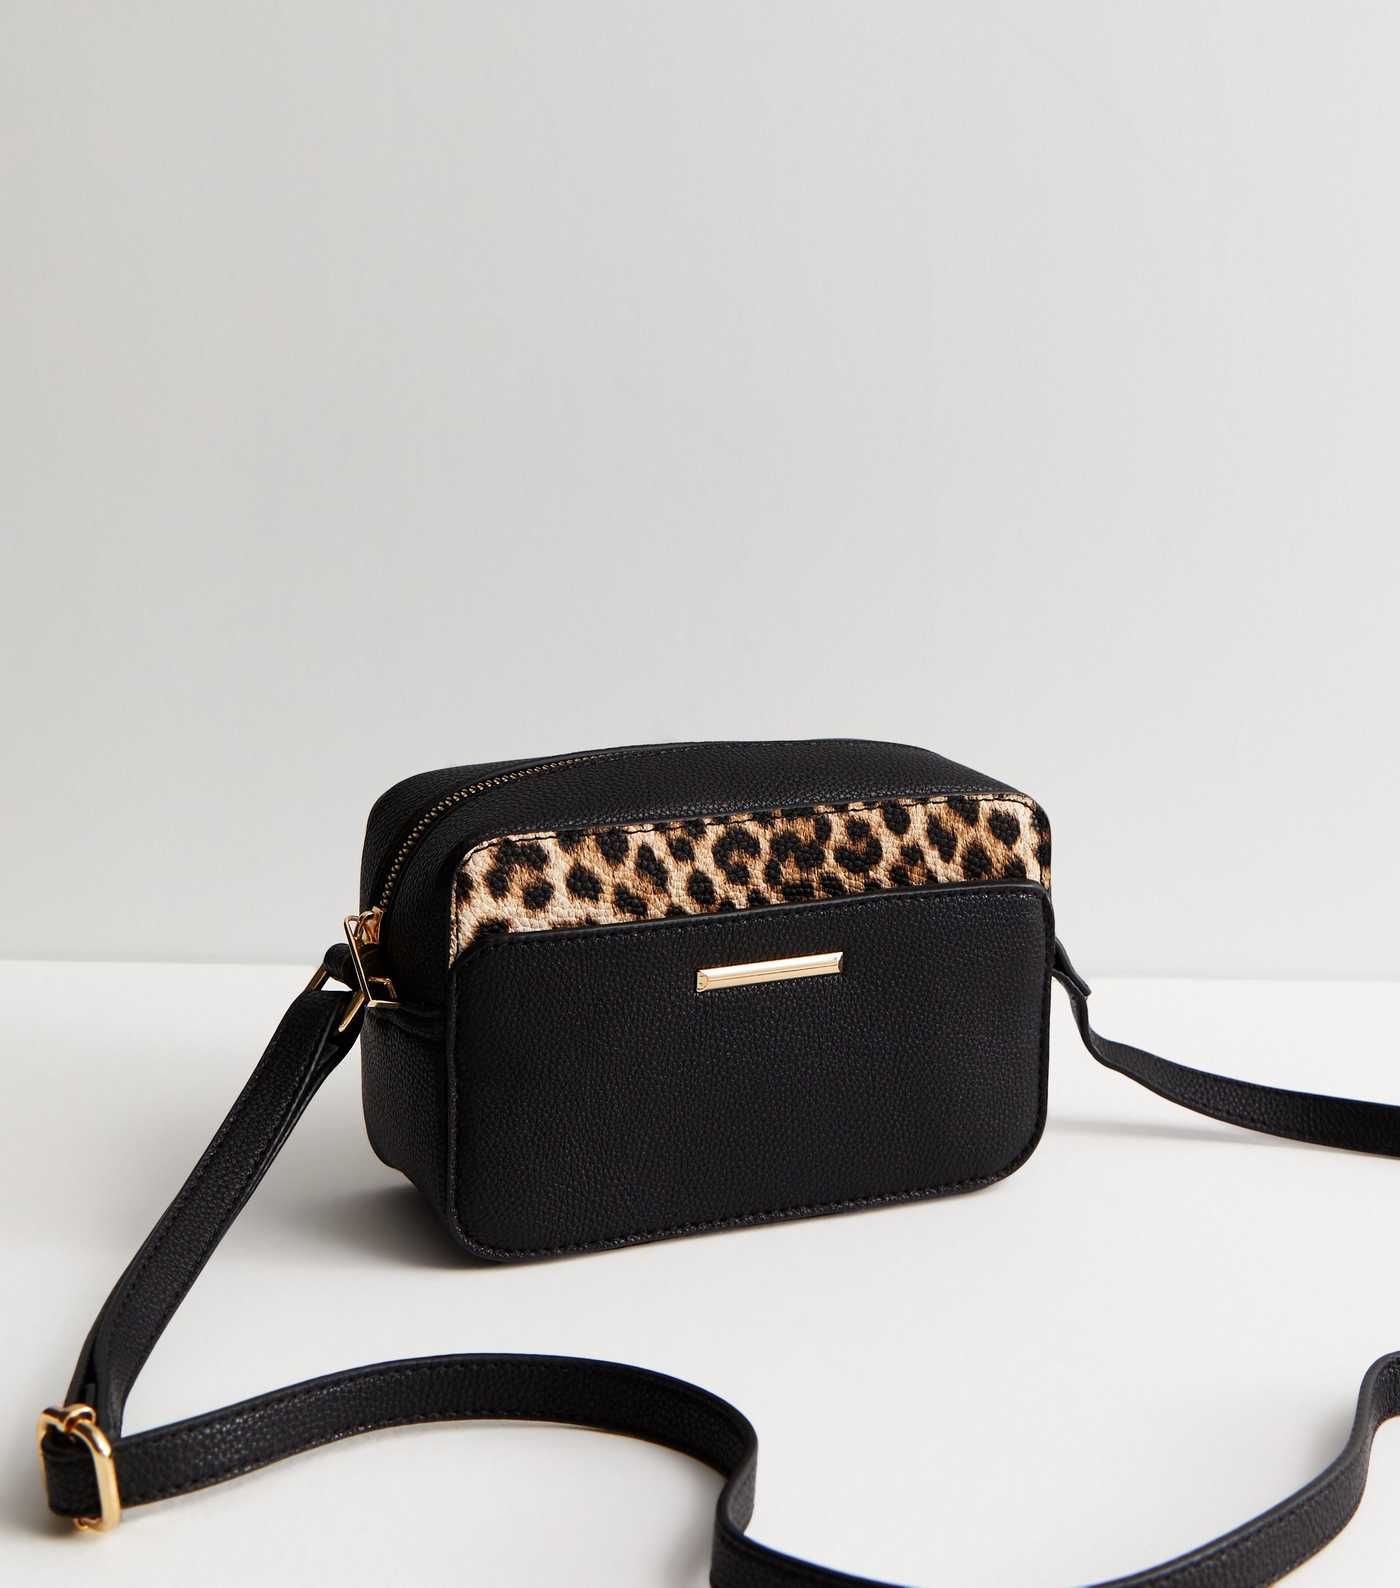 Black Leopard Print Leather-Look Cross Body Bag
						
						Add to Saved Items
						Remove from... | New Look (UK)